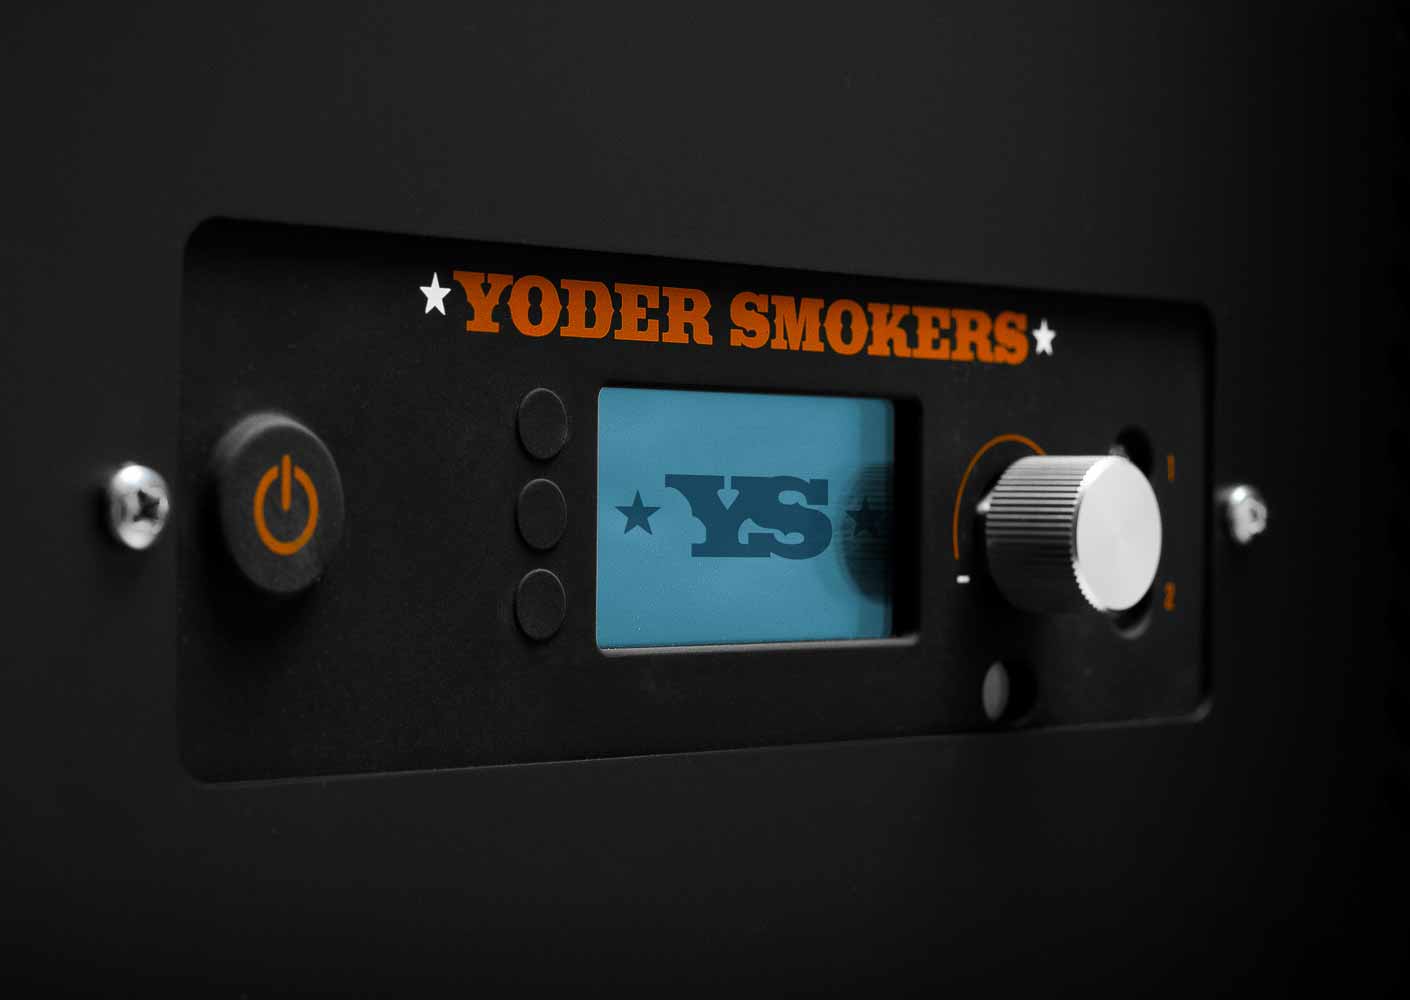 Close up of the Yoder Smokers YS640s controller